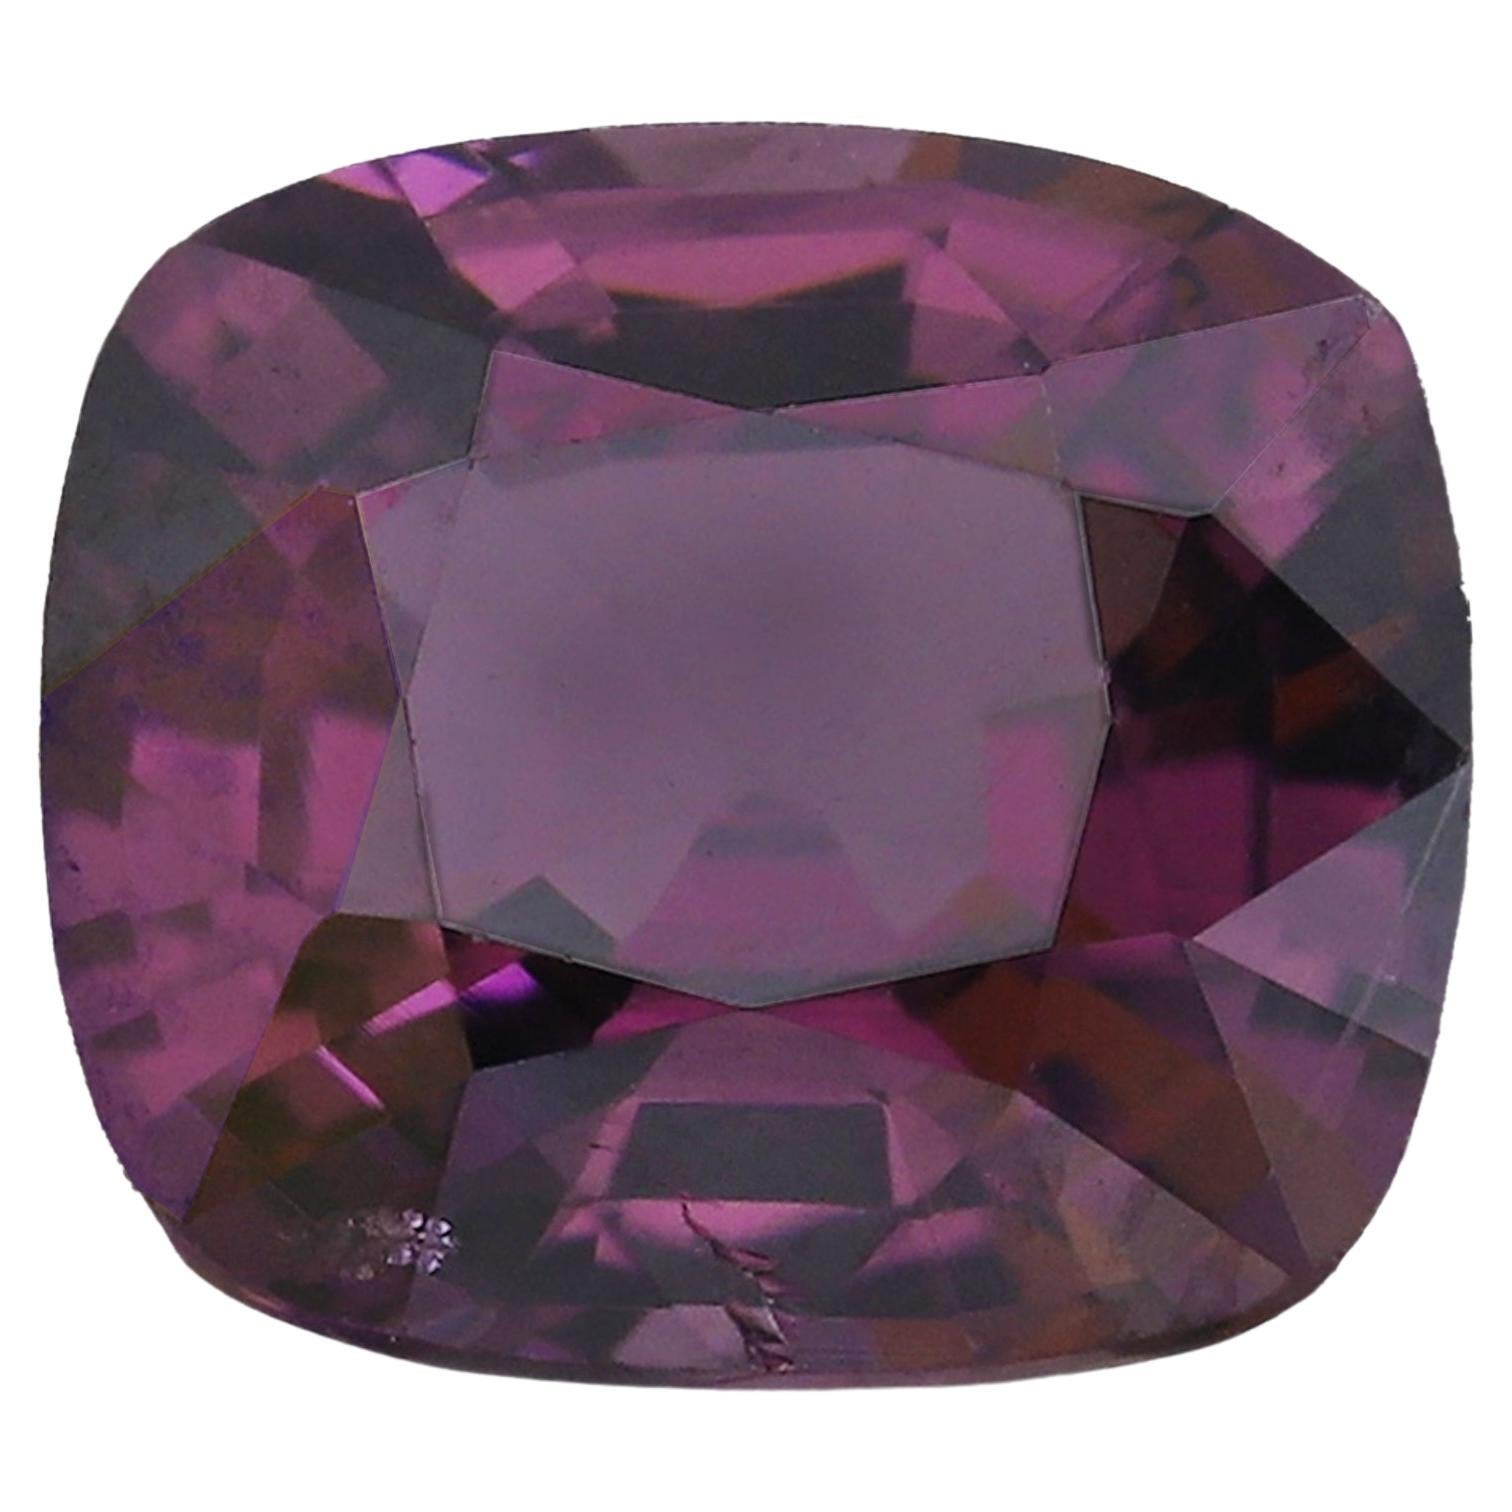 Pinkish Purple Spinel Gemstone 1.41 Carats Certified Loose Spinel for Ring